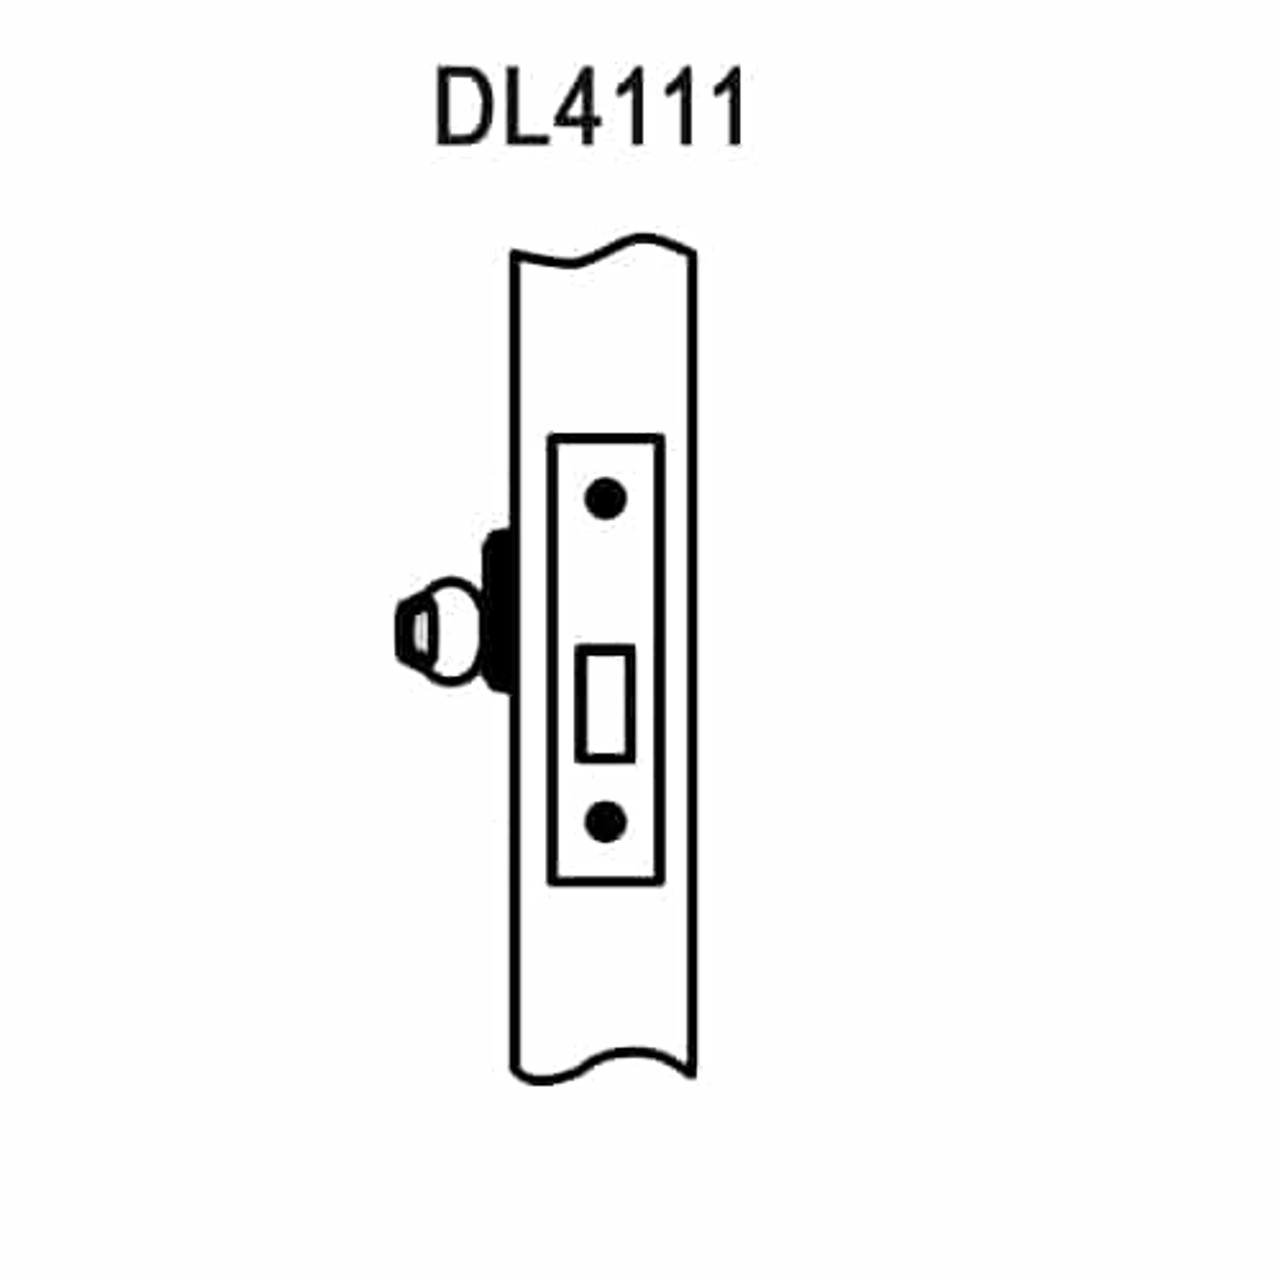 DL4111-625 Corbin DL4100 Series Mortise Deadlocks with Single Cylinder w/ Blank Plate in Bright Chrome